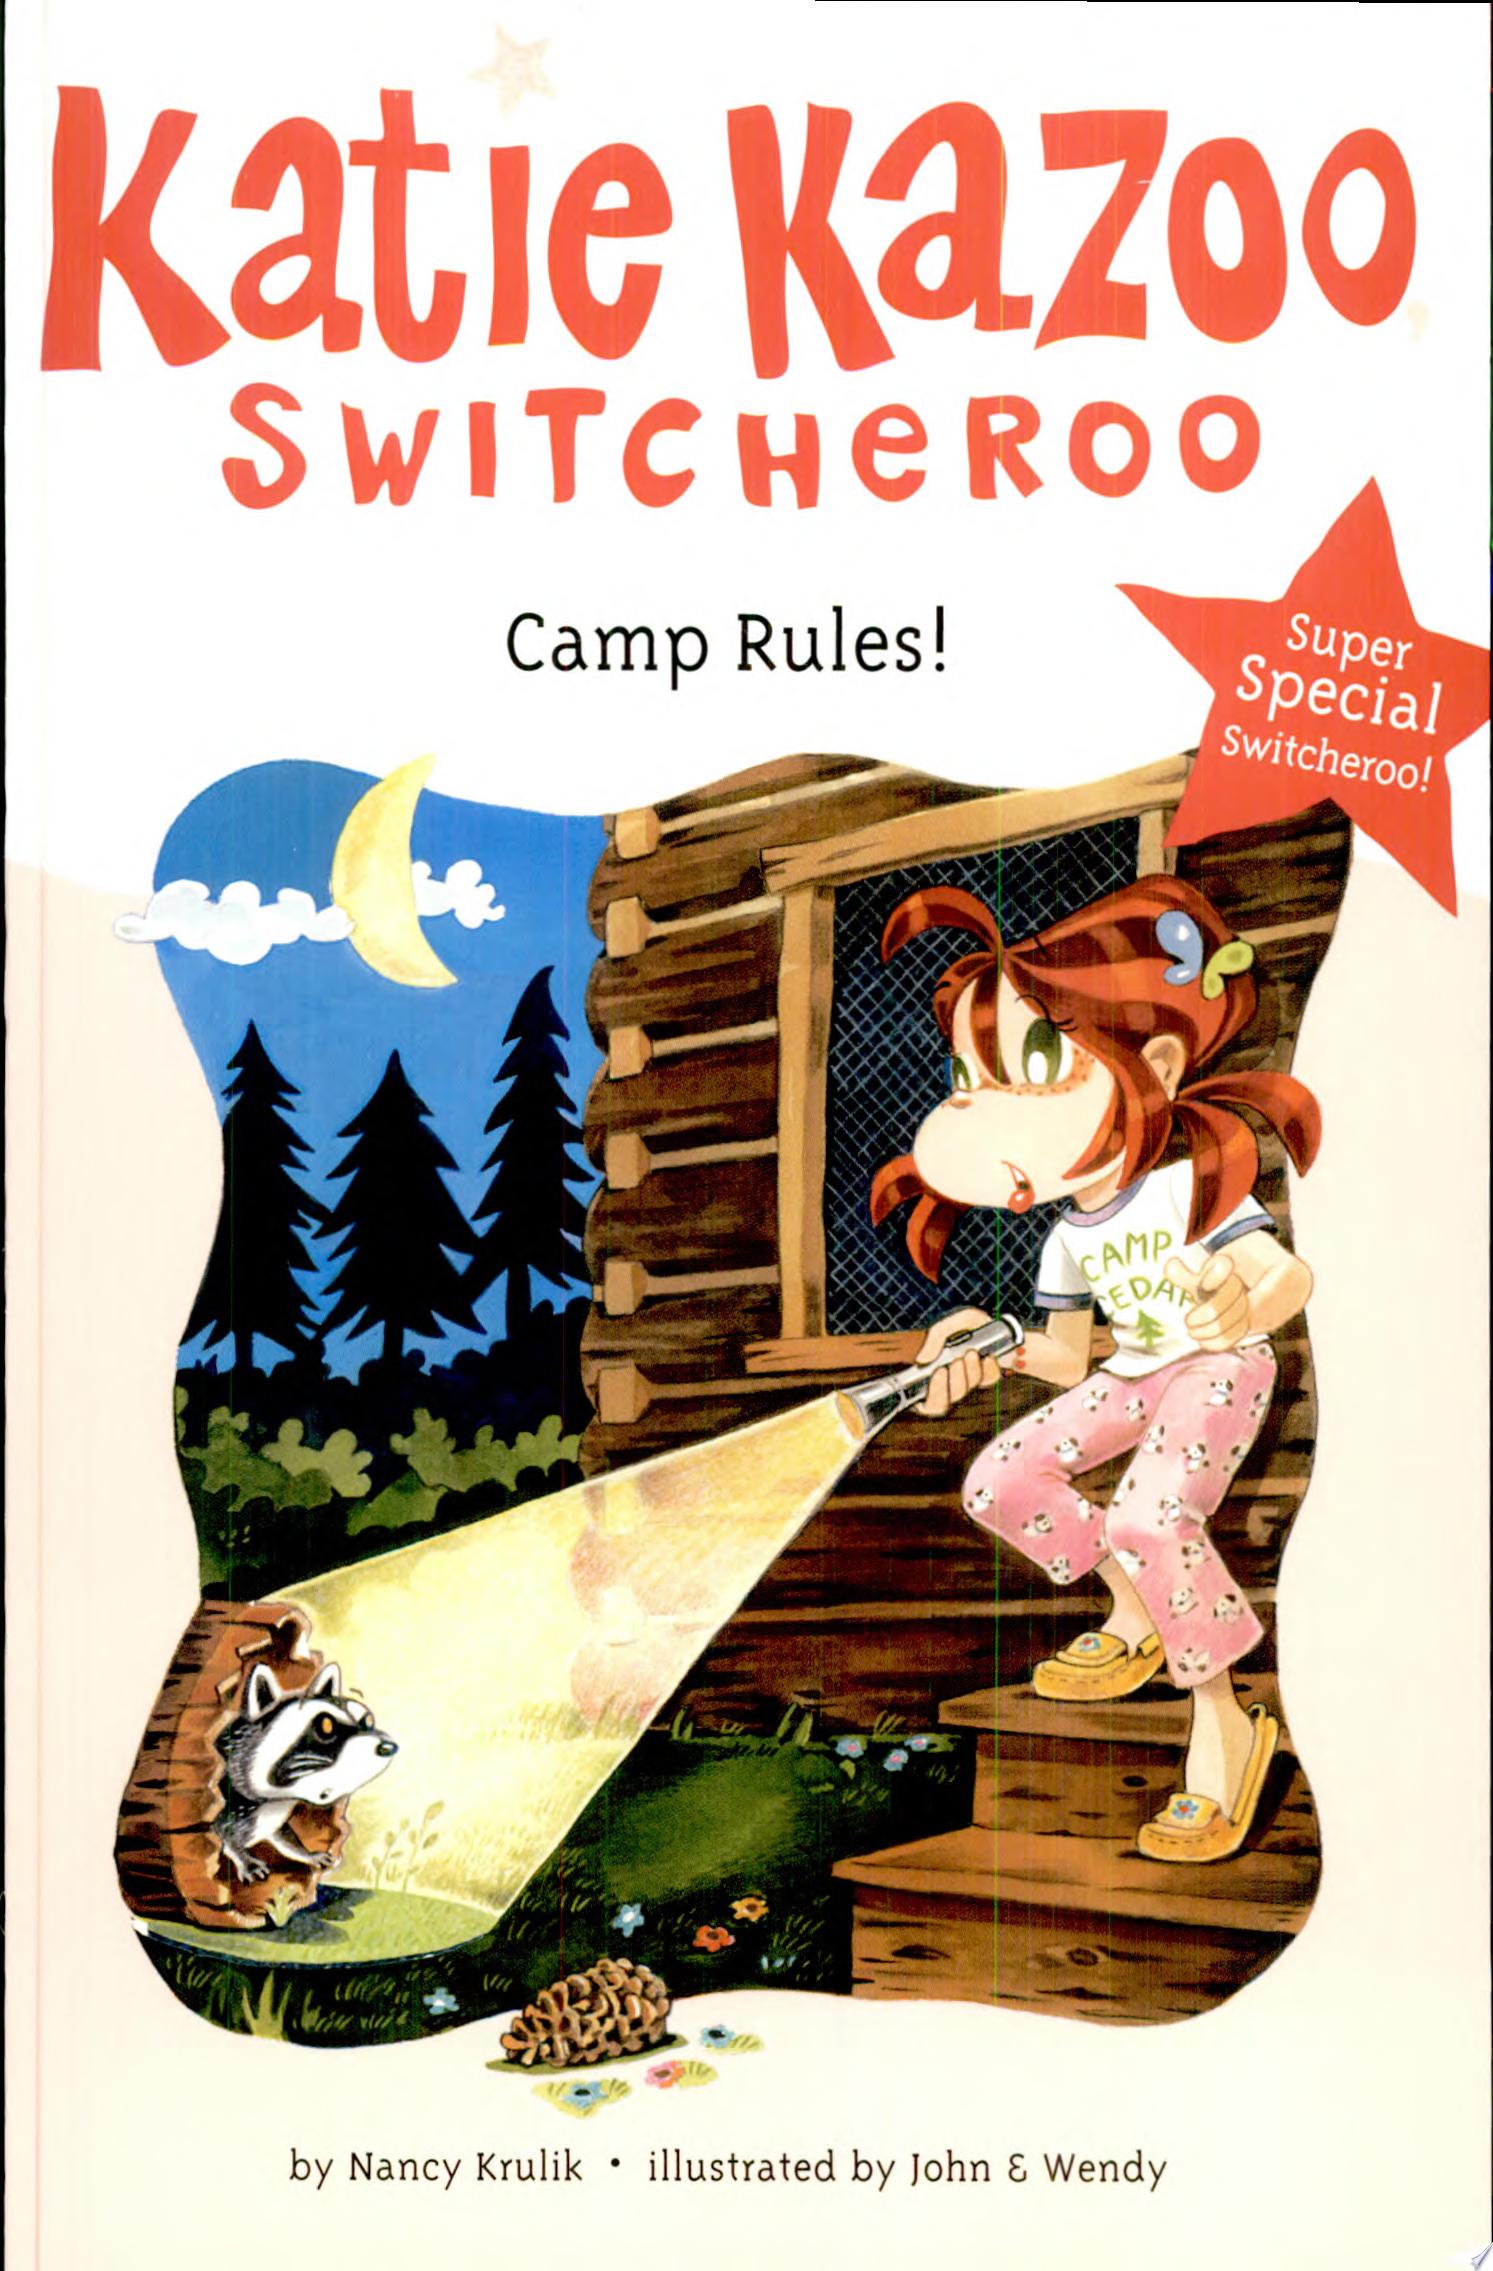 Image for "Camp Rules!"